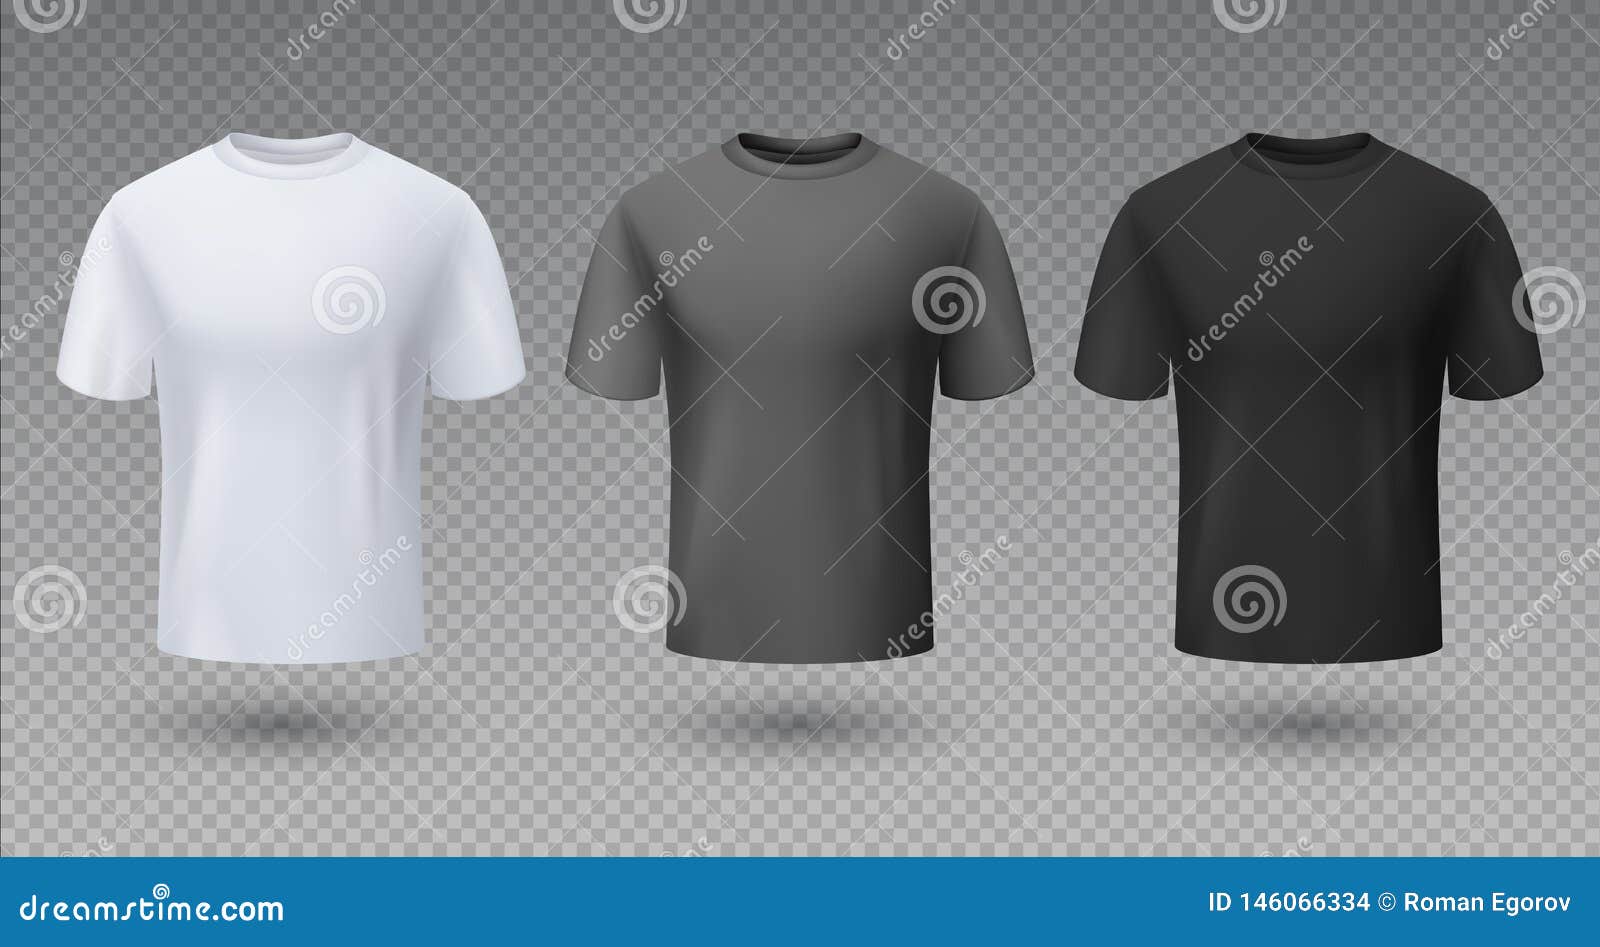 Download Realistic Male Shirt. White Black And Gray T-shirt 3D ...